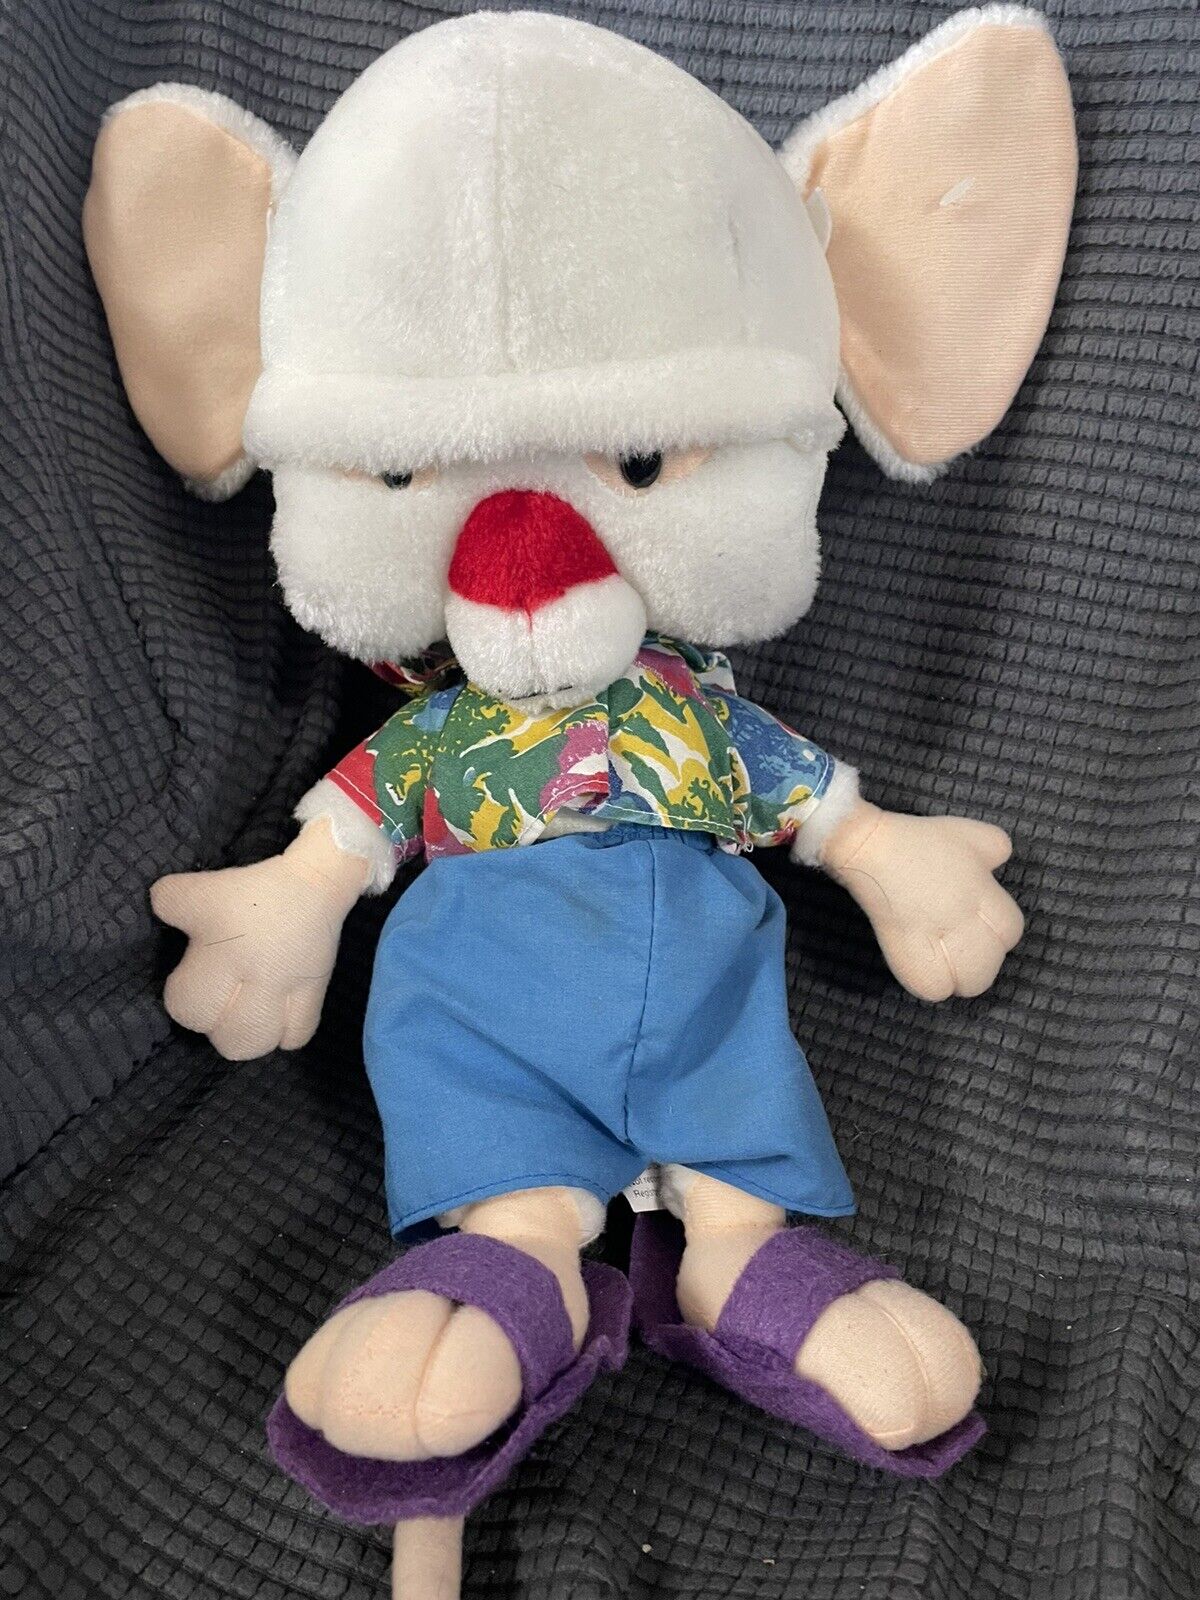 Vintage 1997 Brain Plush From WB Looney Toons, Pinky & The Brain